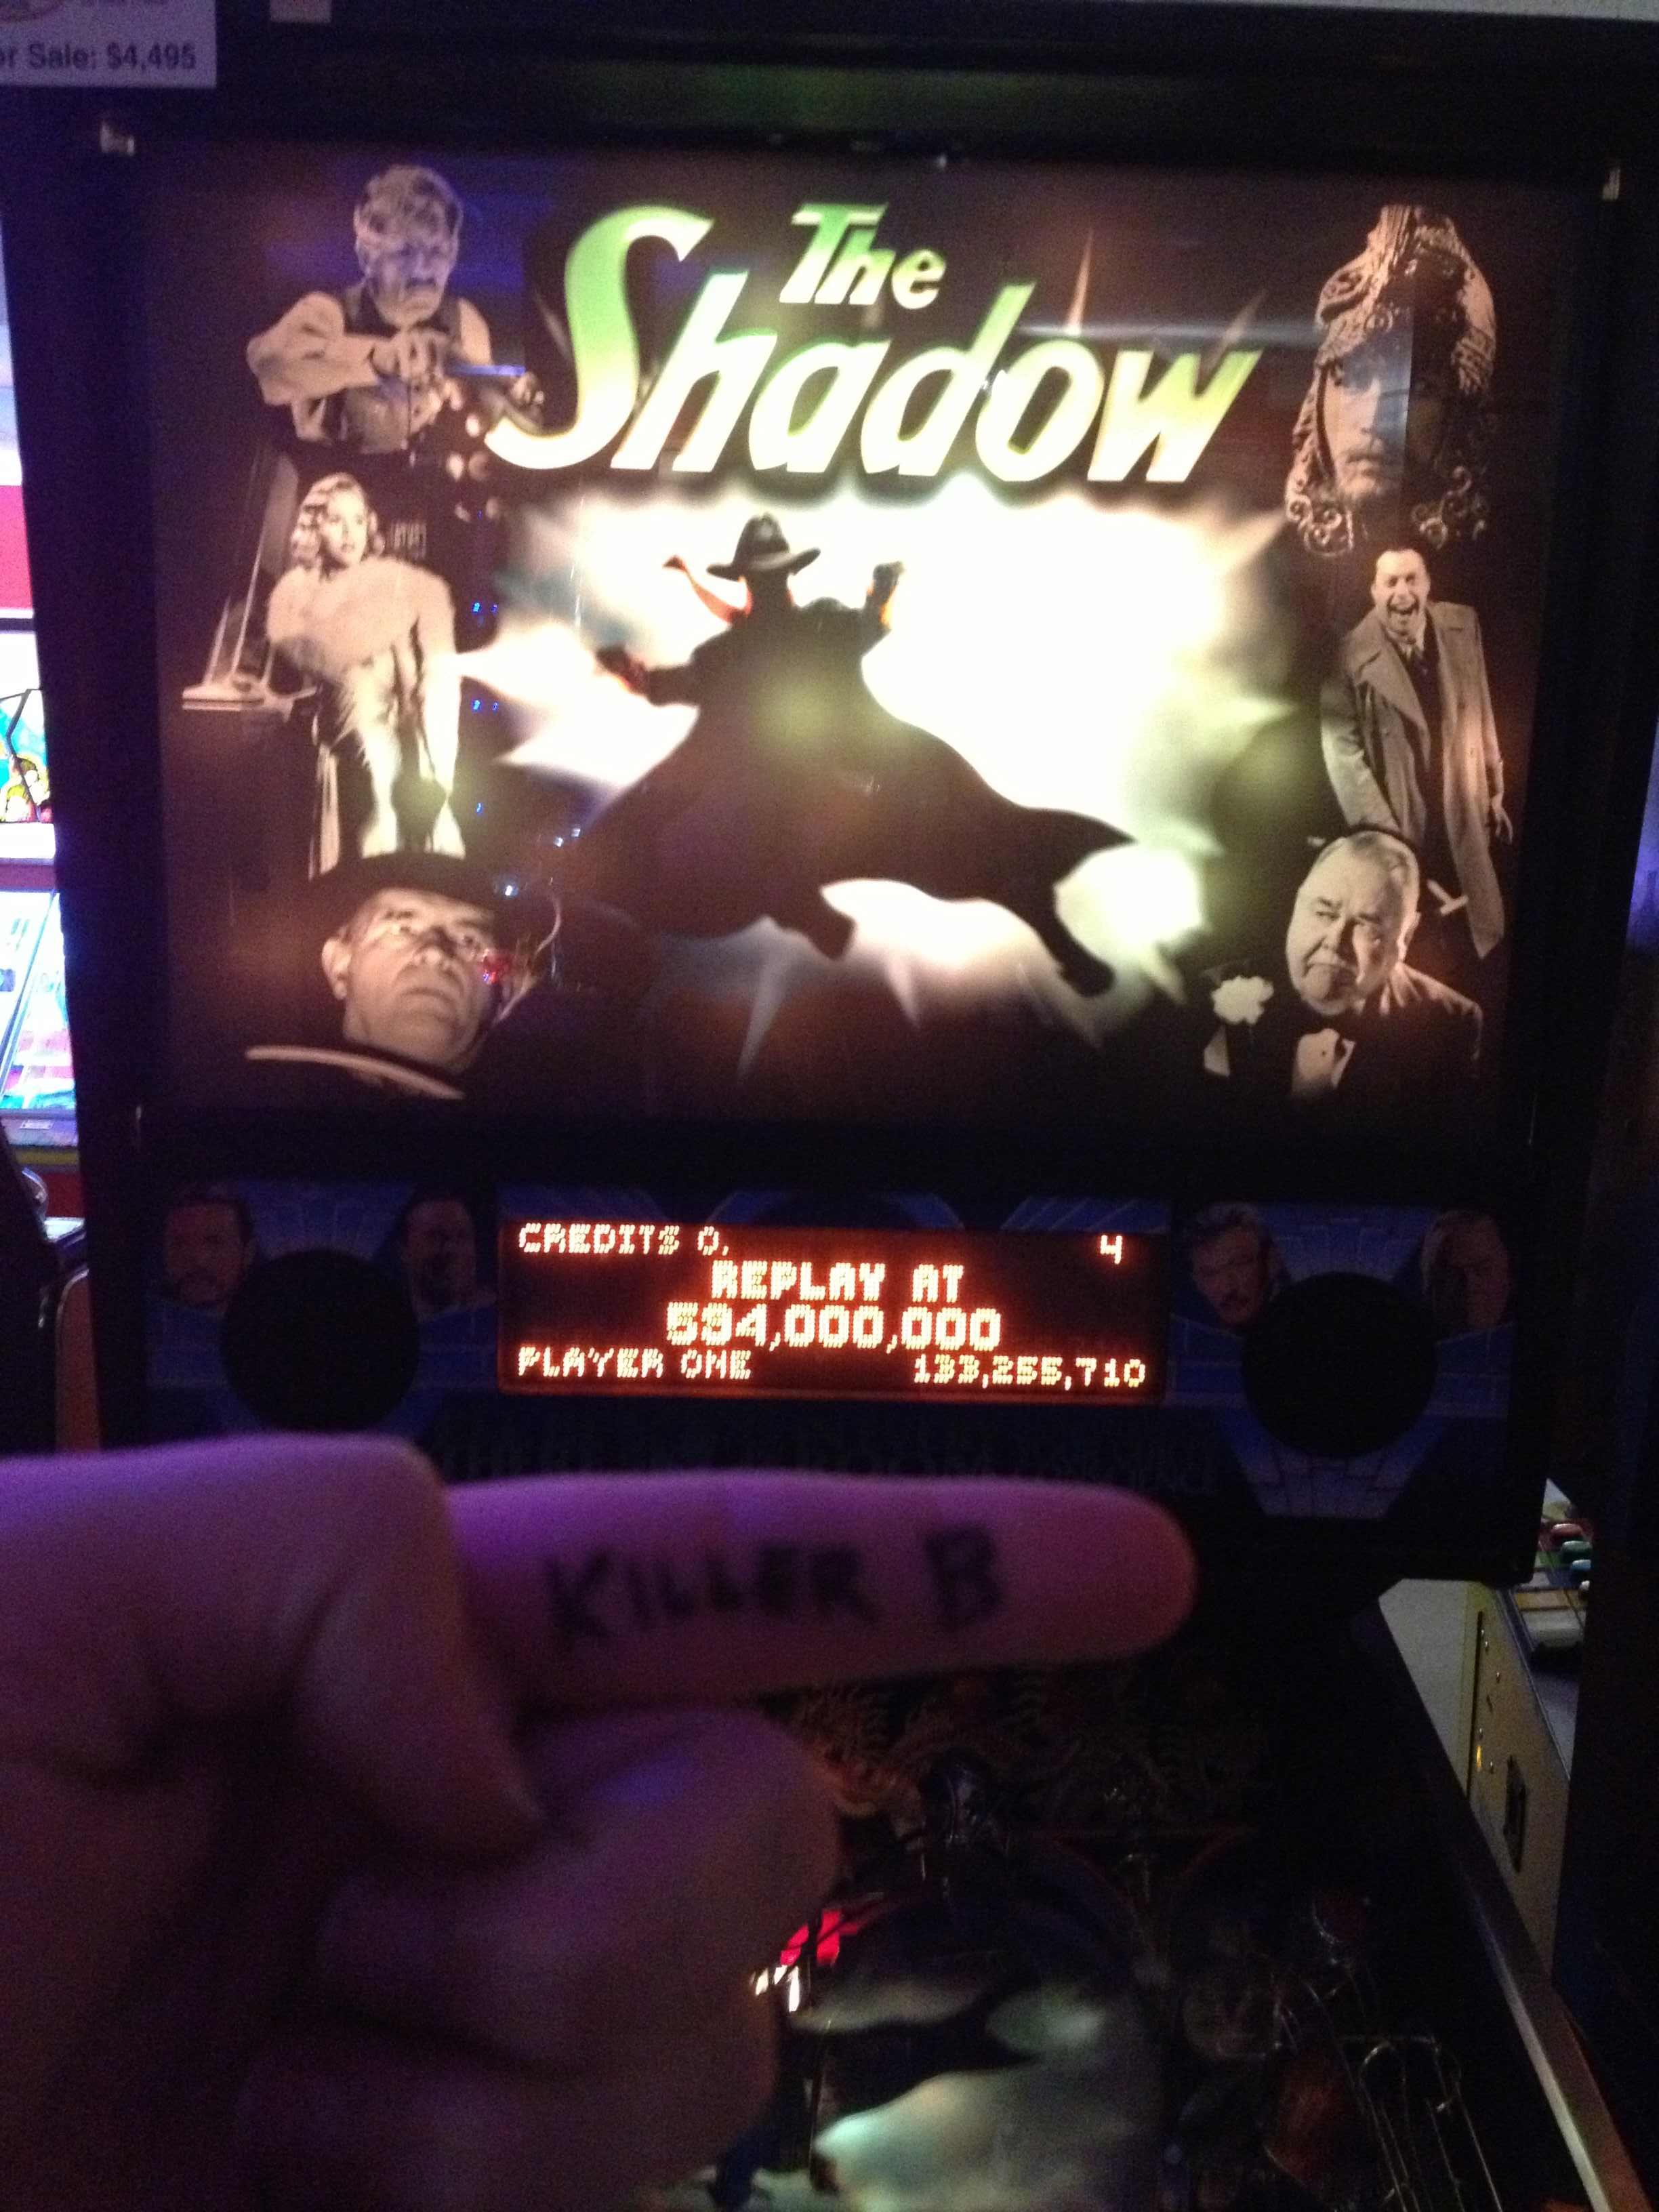 The Shadow 133,255,710 points